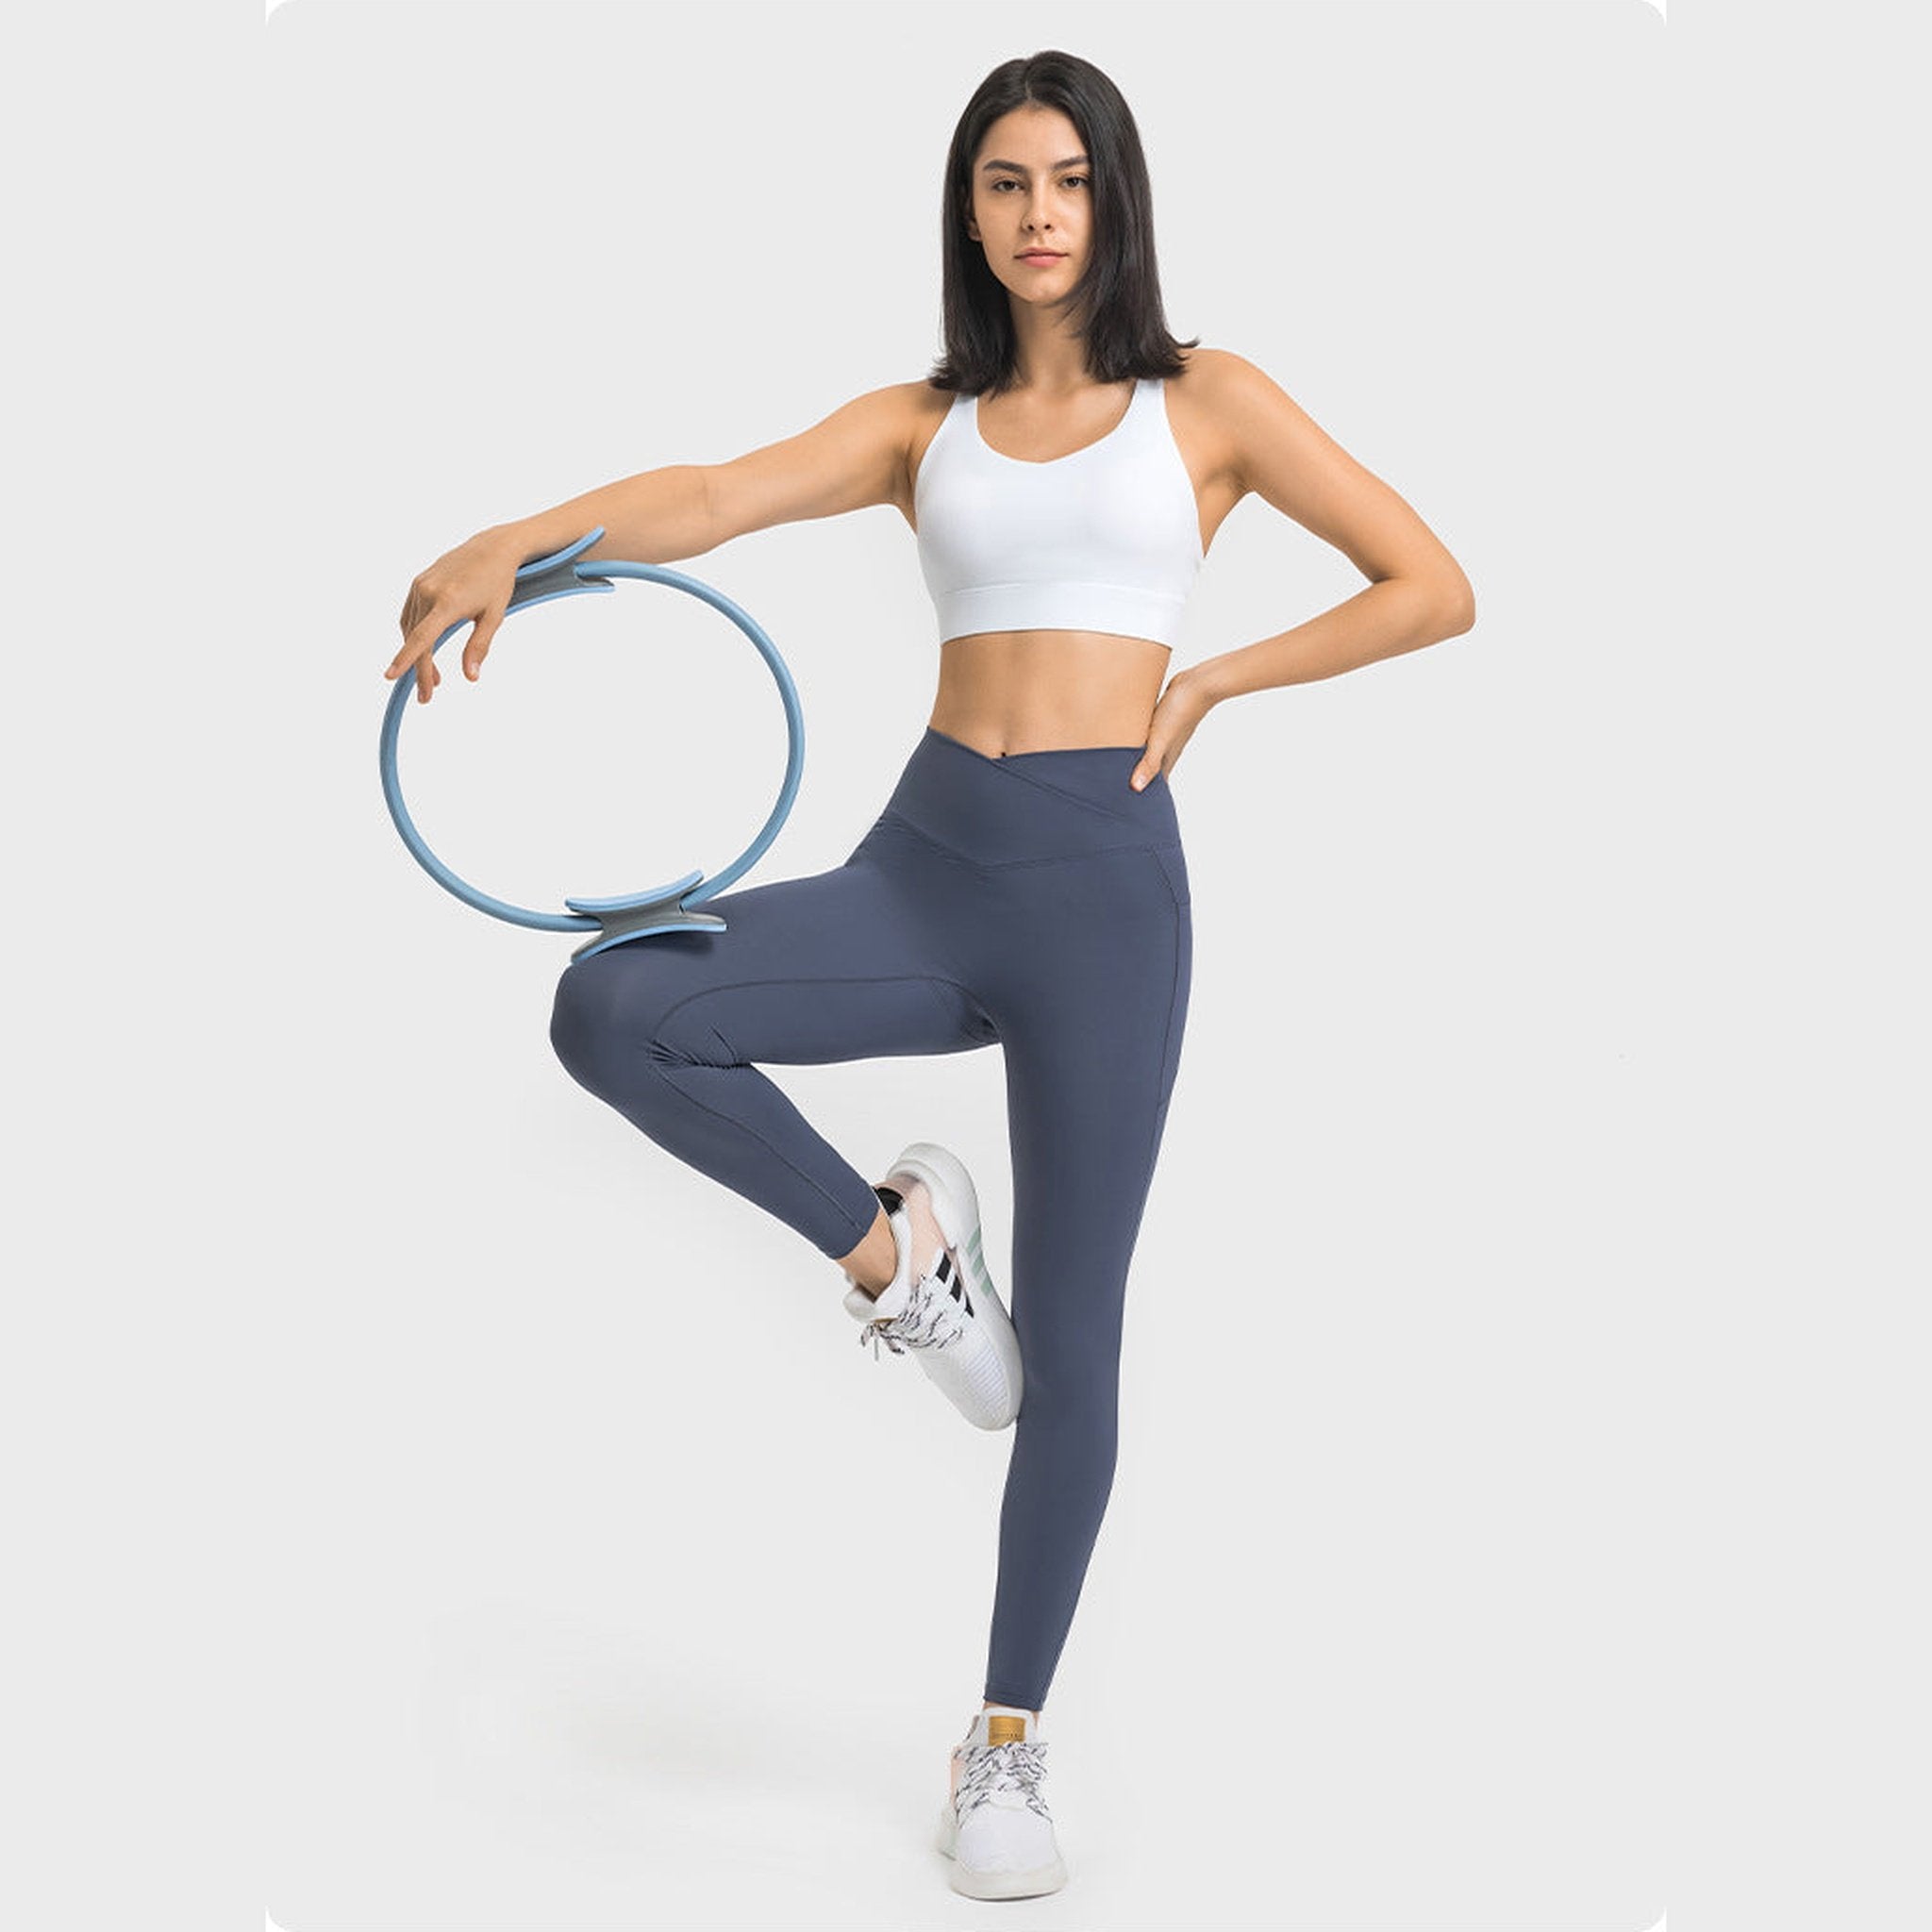 High-Waist Velocity Anti-Camel Toe Workout Leggings With Pockets